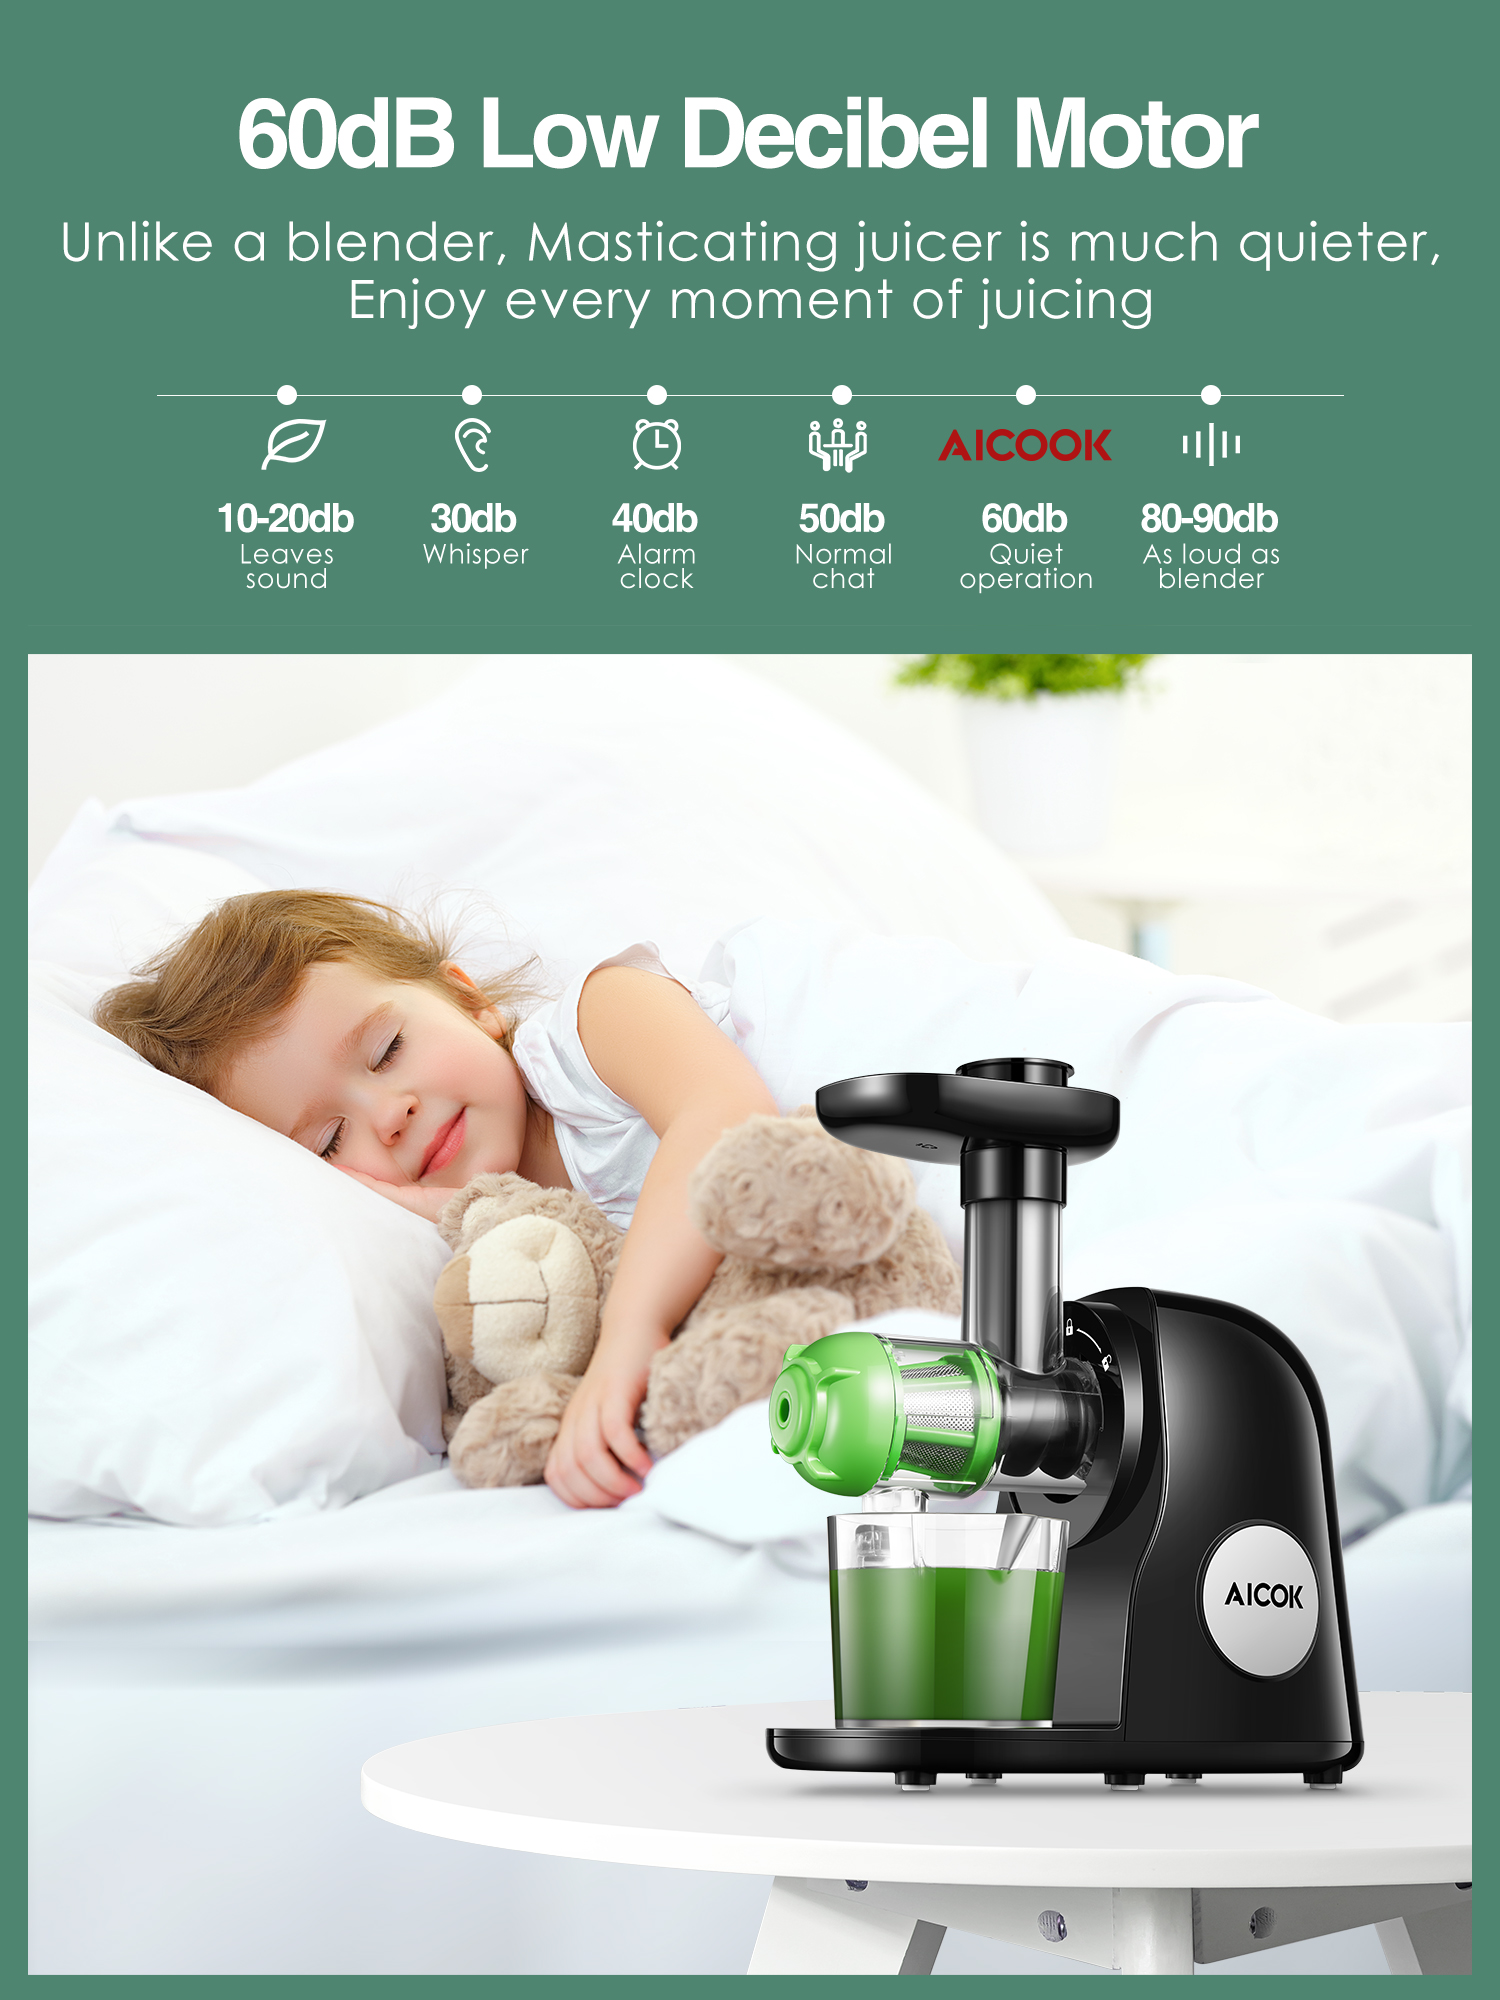 Aicok Juicer Machines, Slow Masticating Juicer Extractor Easy to Clean, Cold Press Juicer with Brush, Juicer with Quiet Motor & Reverse Function, for High Nutrient Fruit & Vegetable Juice - image 5 of 7